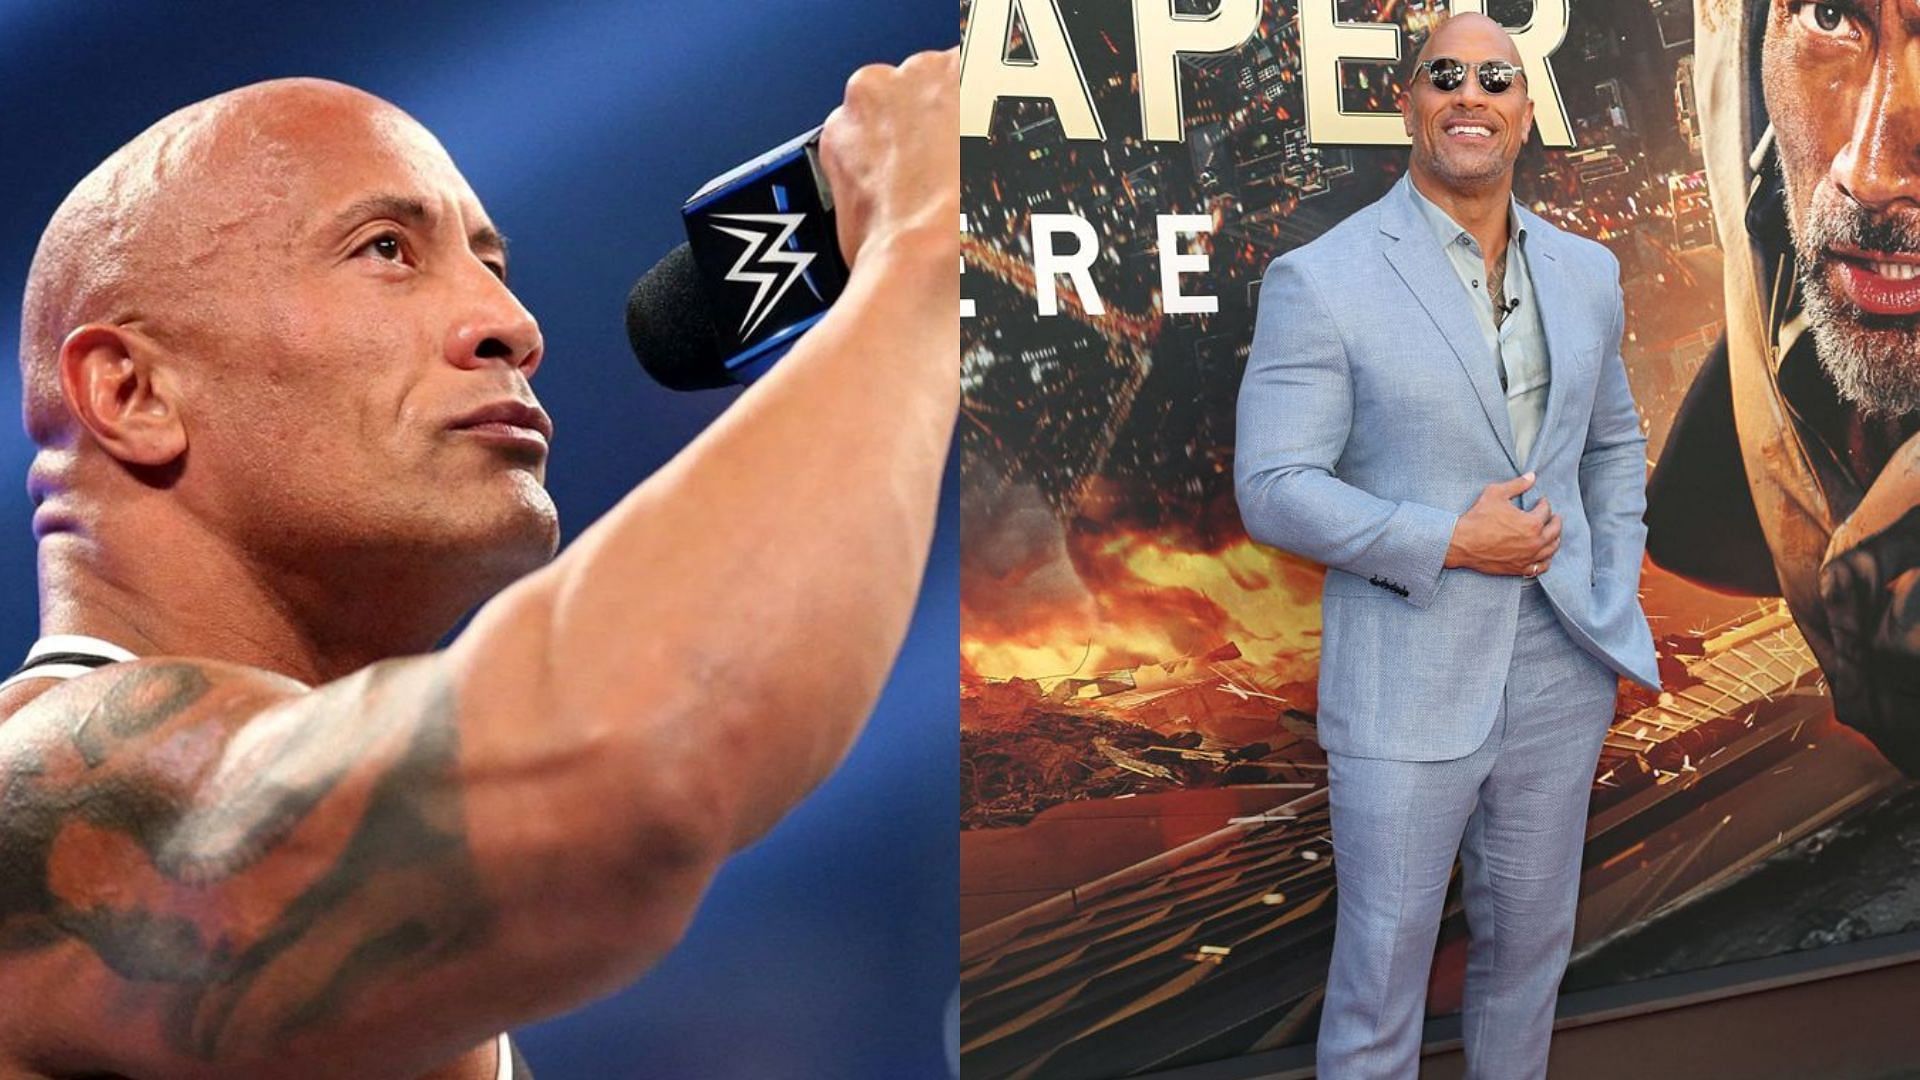 The Rock recently made a huge non-WWE appearance